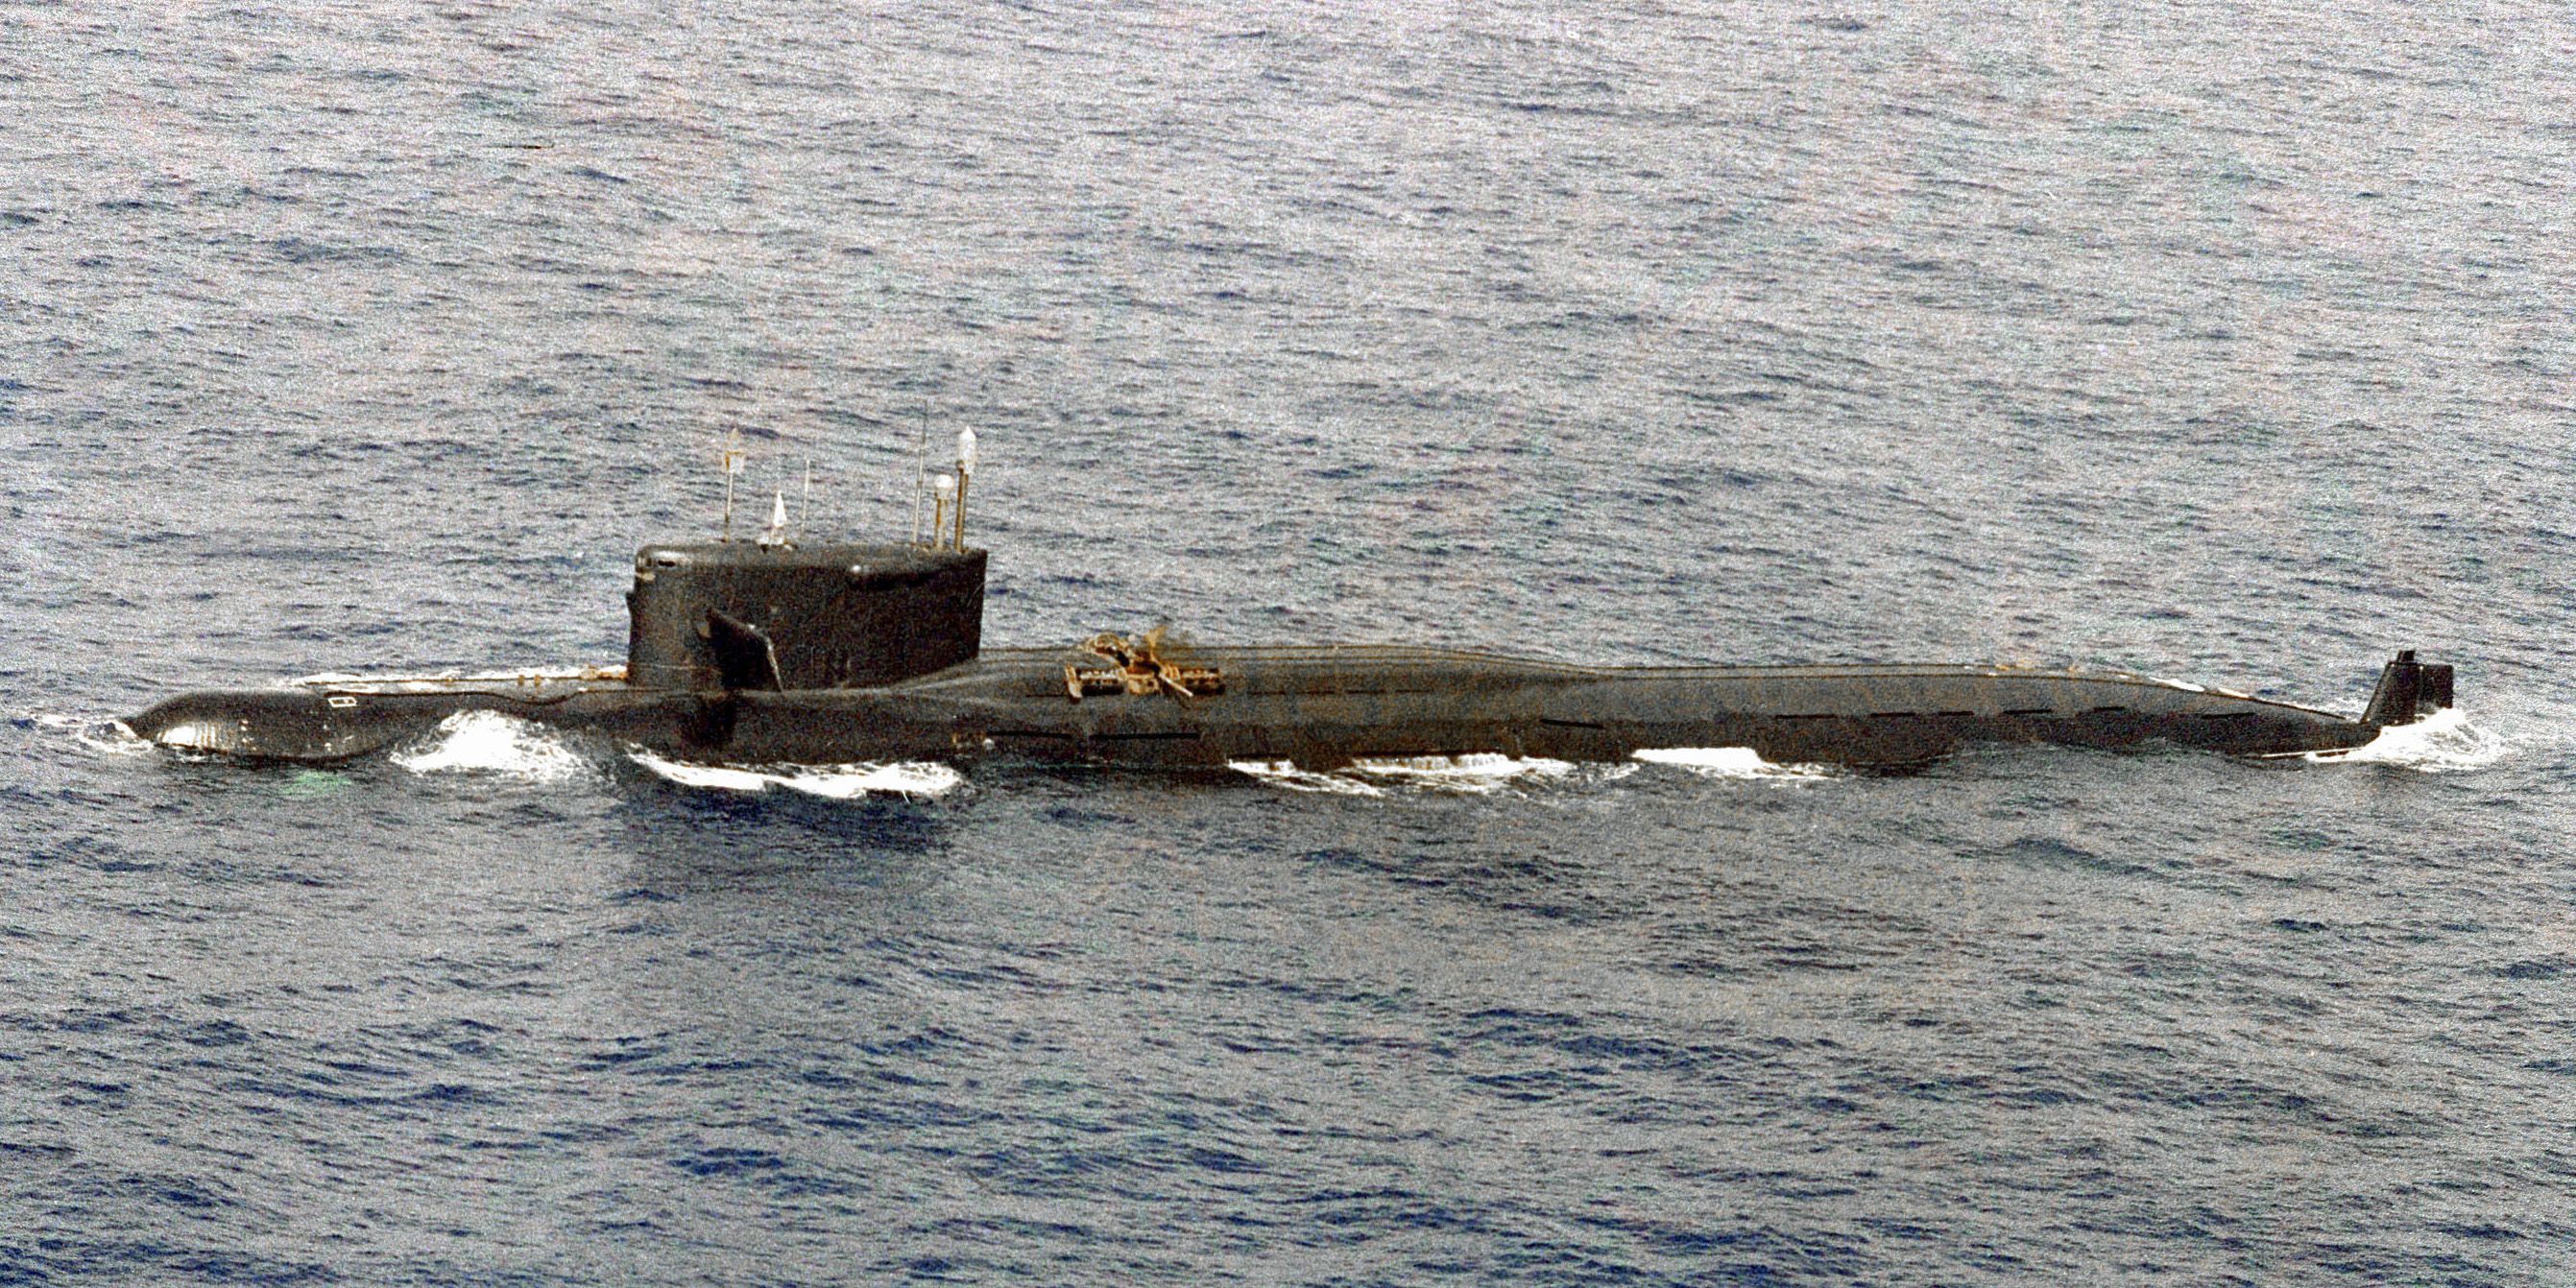 russian nuclear submarine disaster